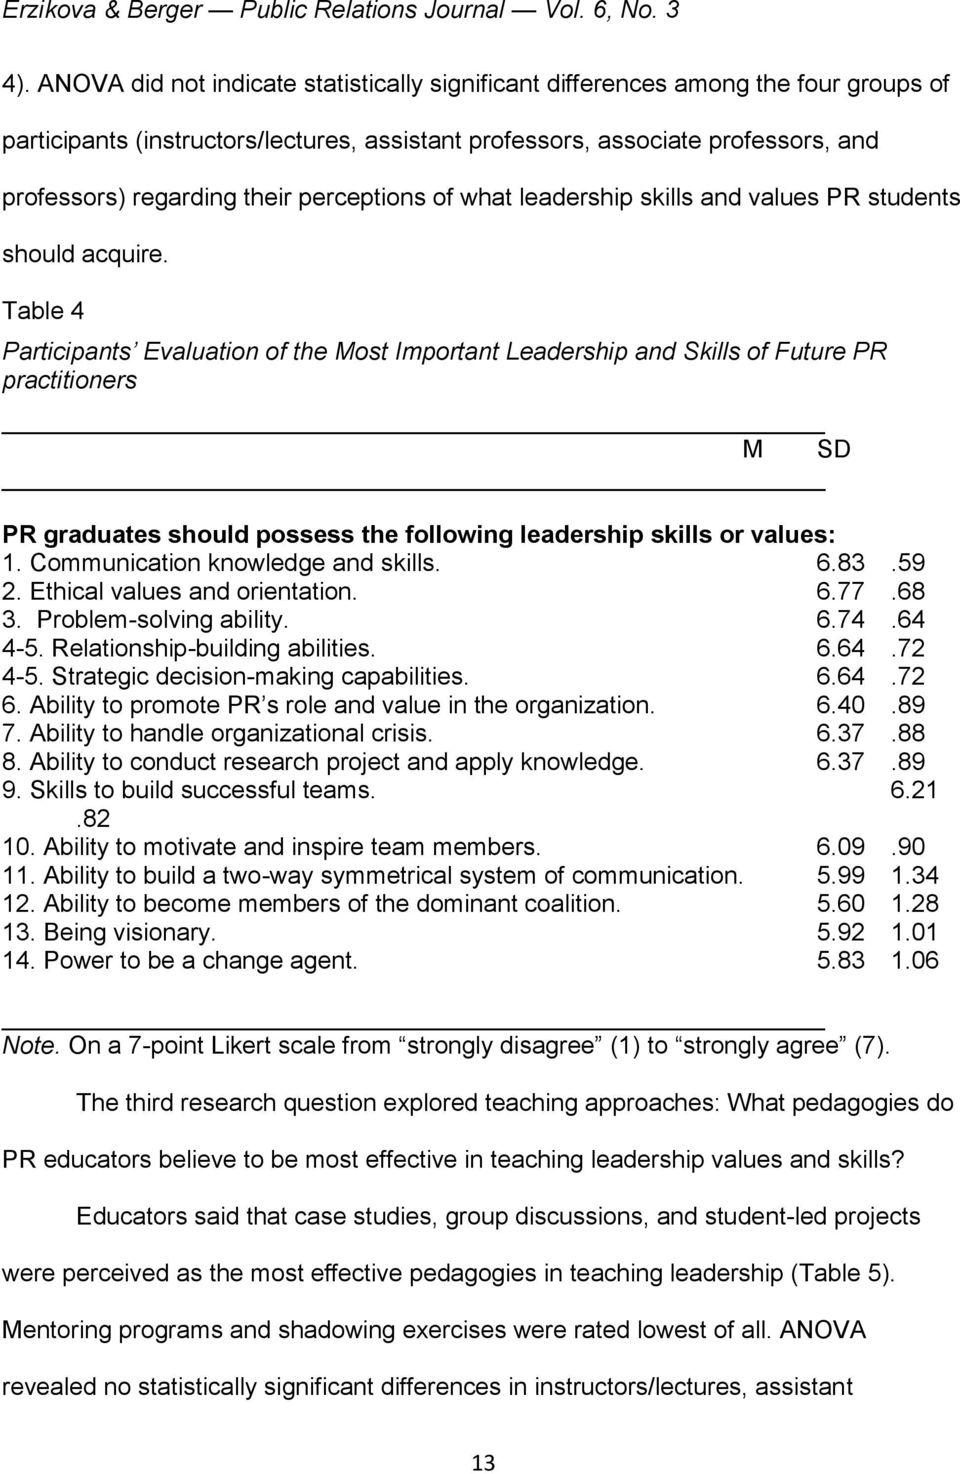 perceptions of what leadership skills and values PR students should acquire.